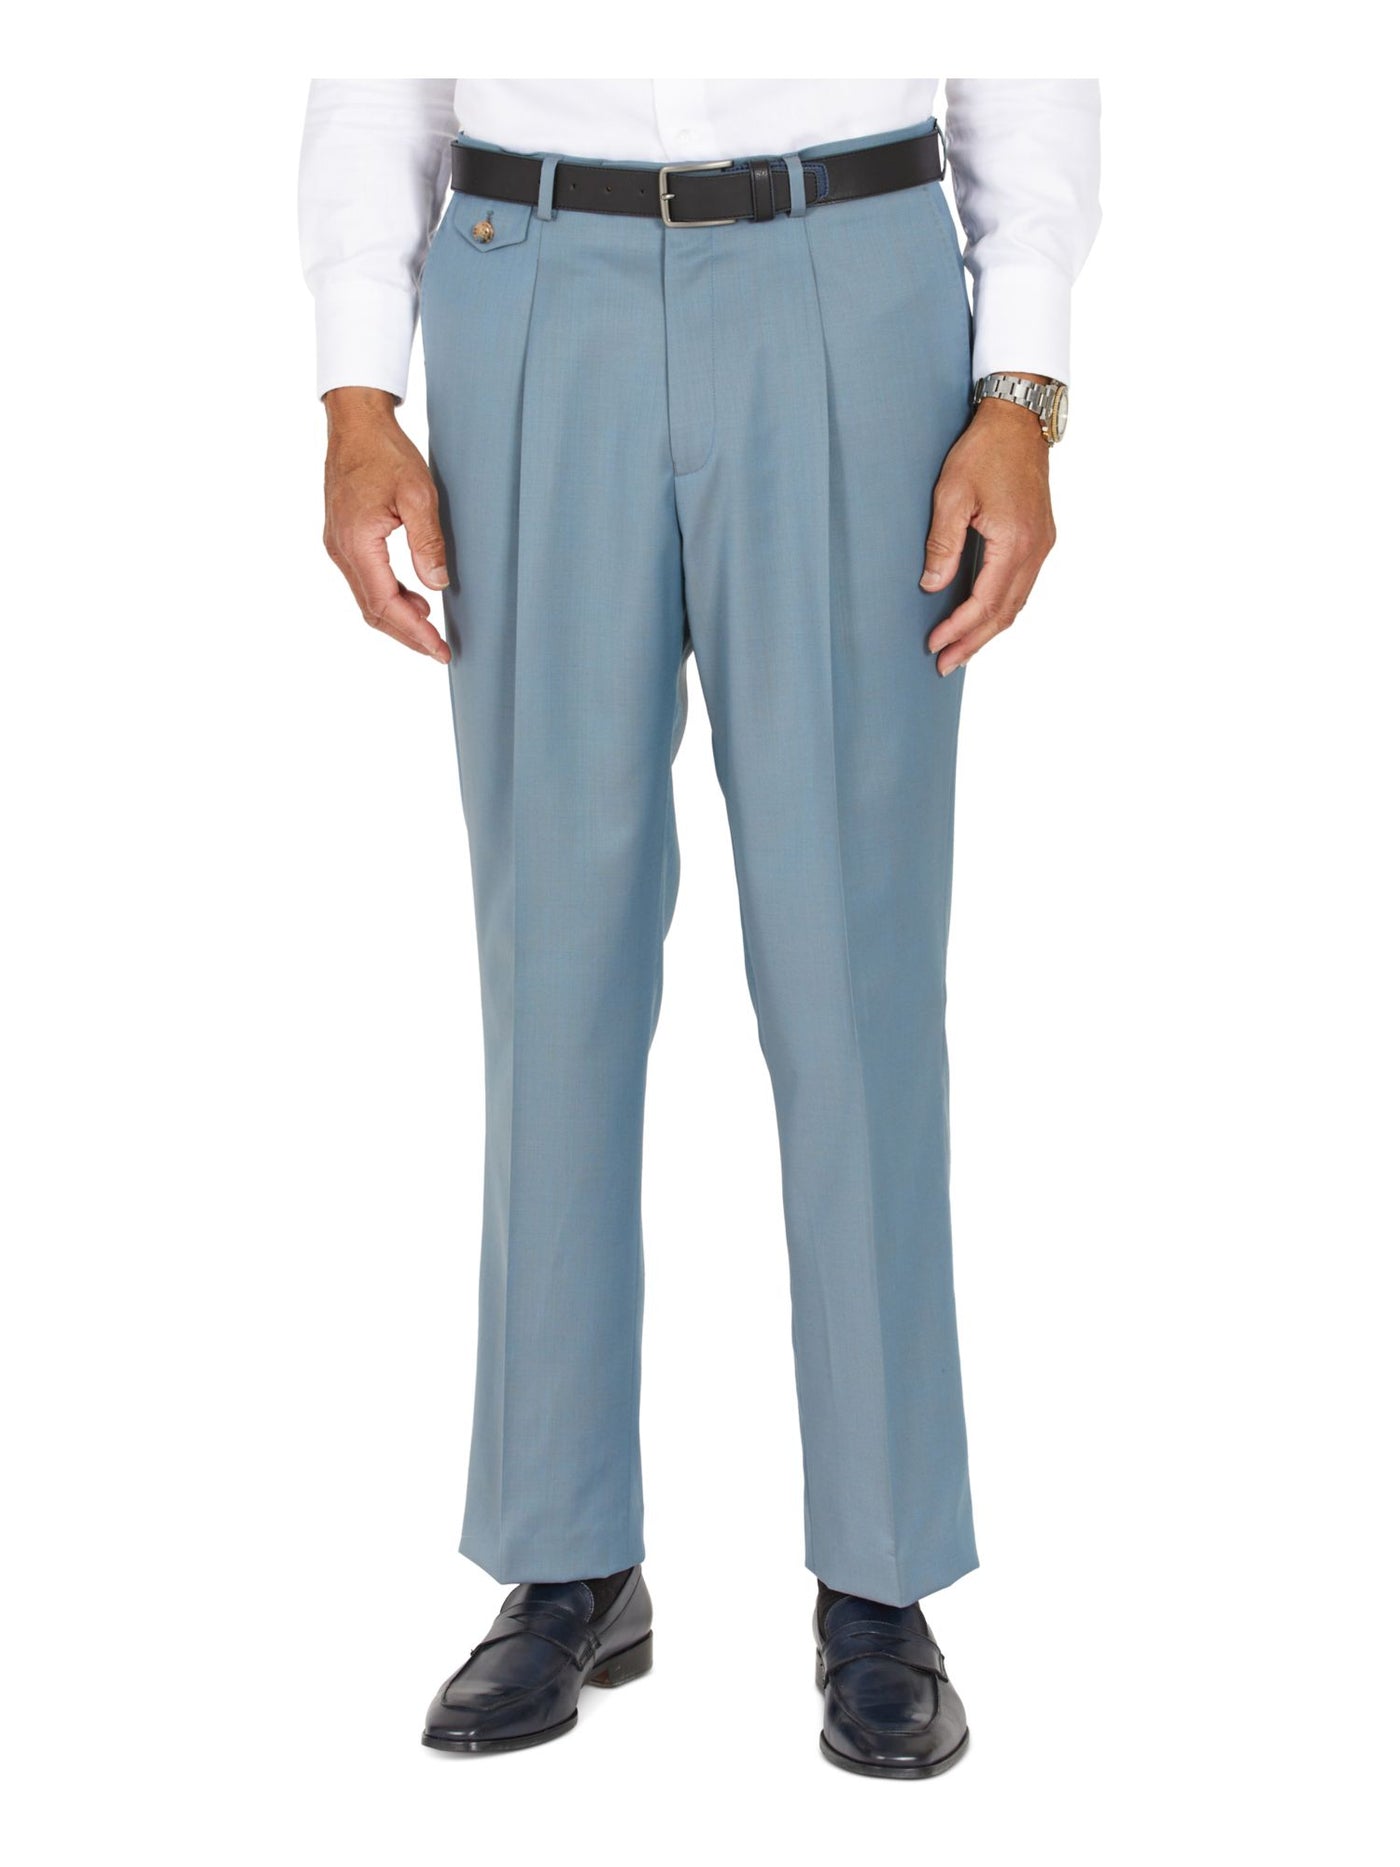 TAYION BY MONTEE HOLLAND Mens Blue Pleated, Classic Fit Stretch Suit Separate Pants 32W/ 32L